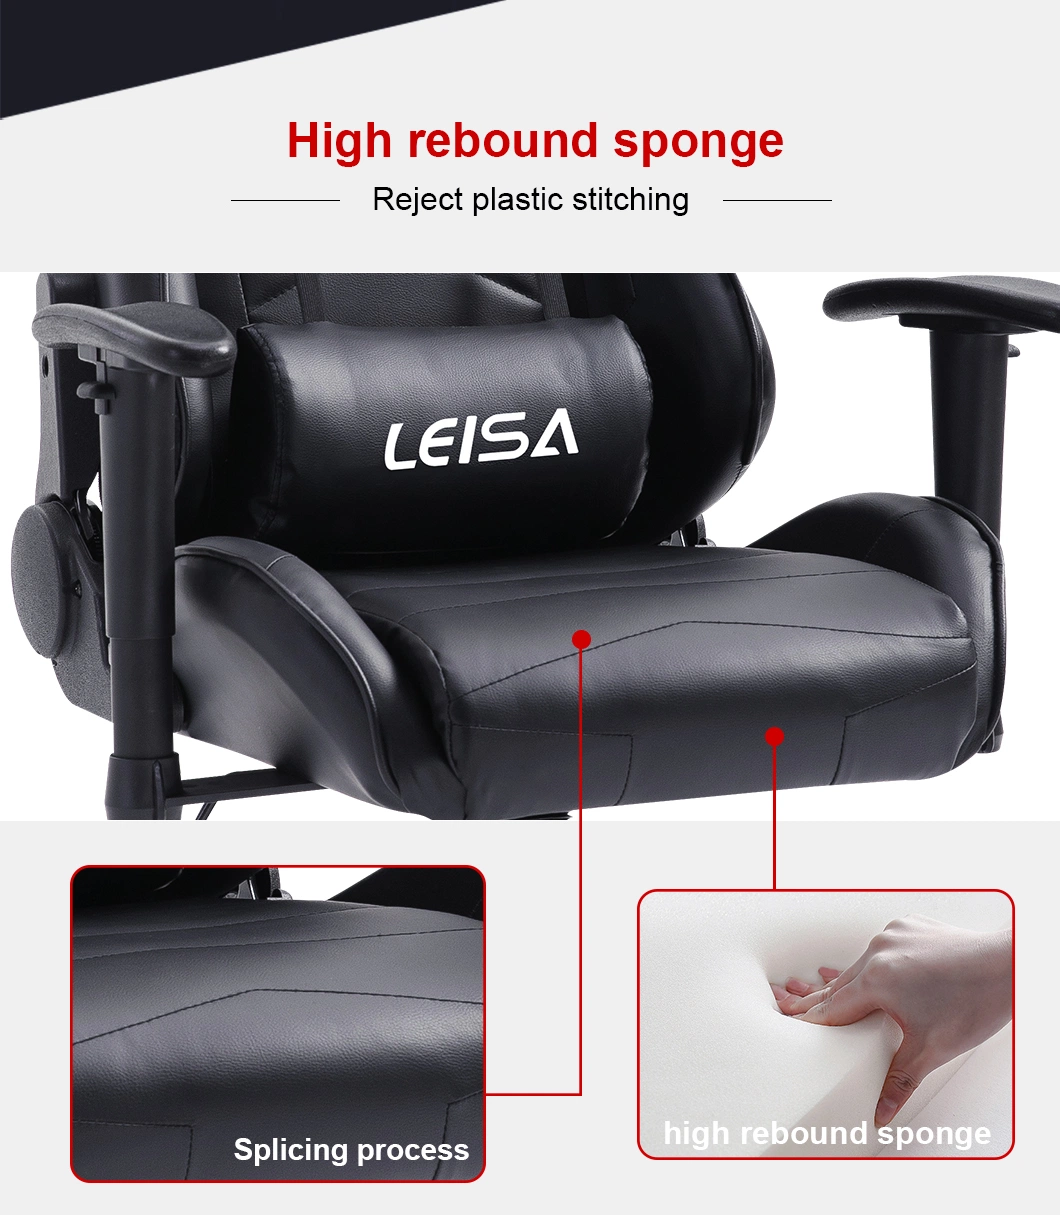 Home Leisure Ergonomic Swivel Chair Sleeping Game Chair Office Gaming Chair with Armrests